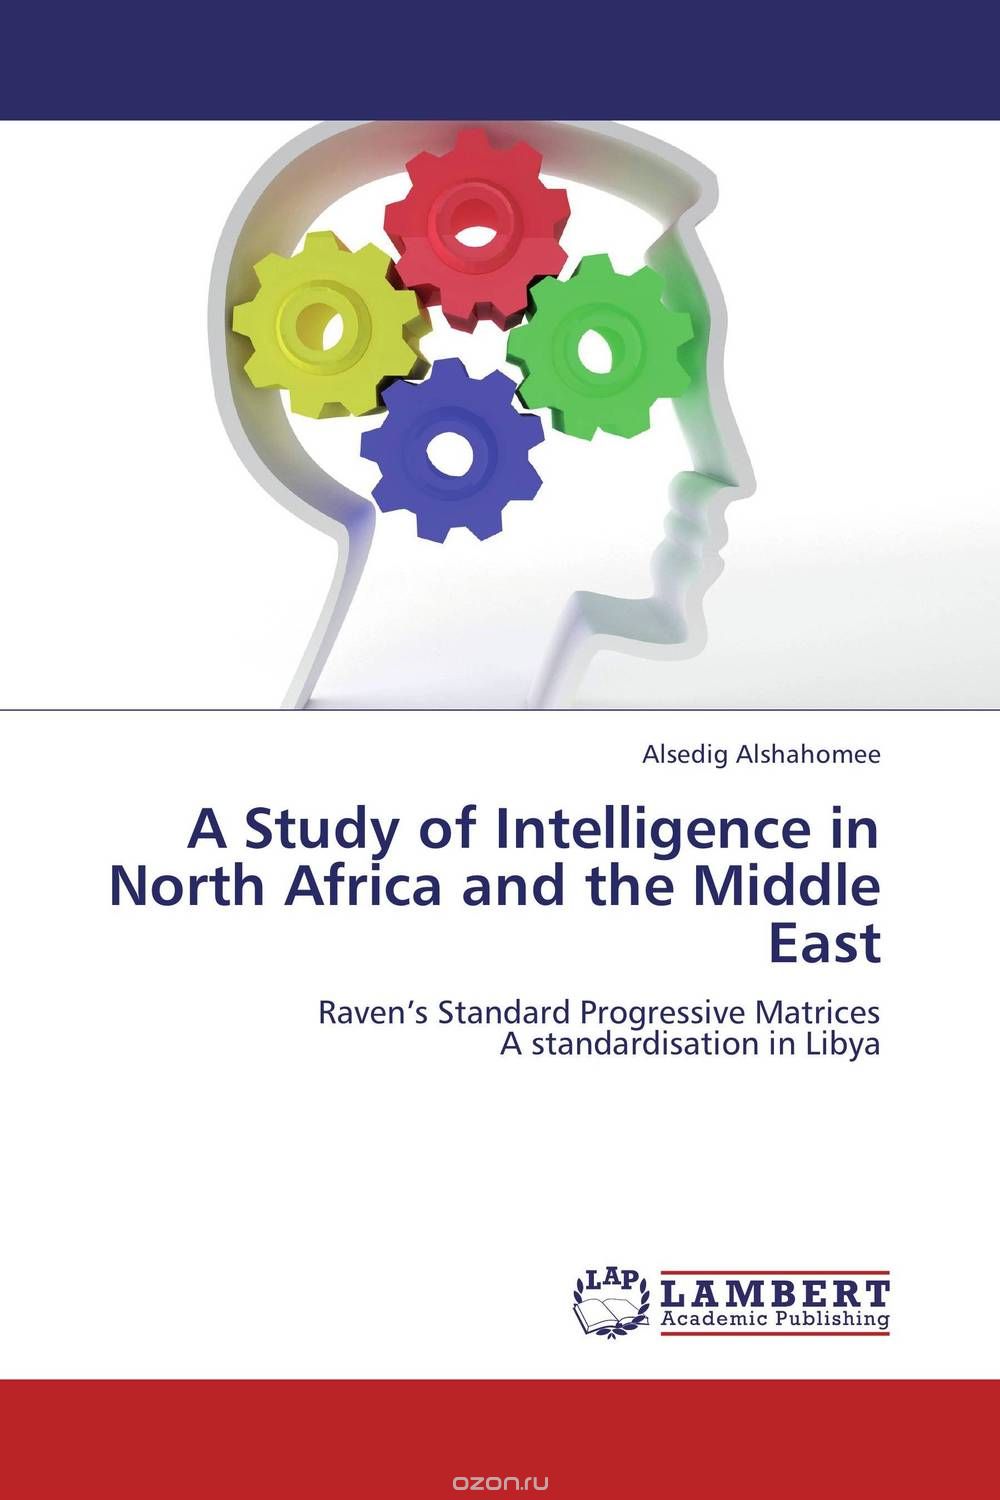 Скачать книгу "A Study of Intelligence in North Africa and the Middle East"